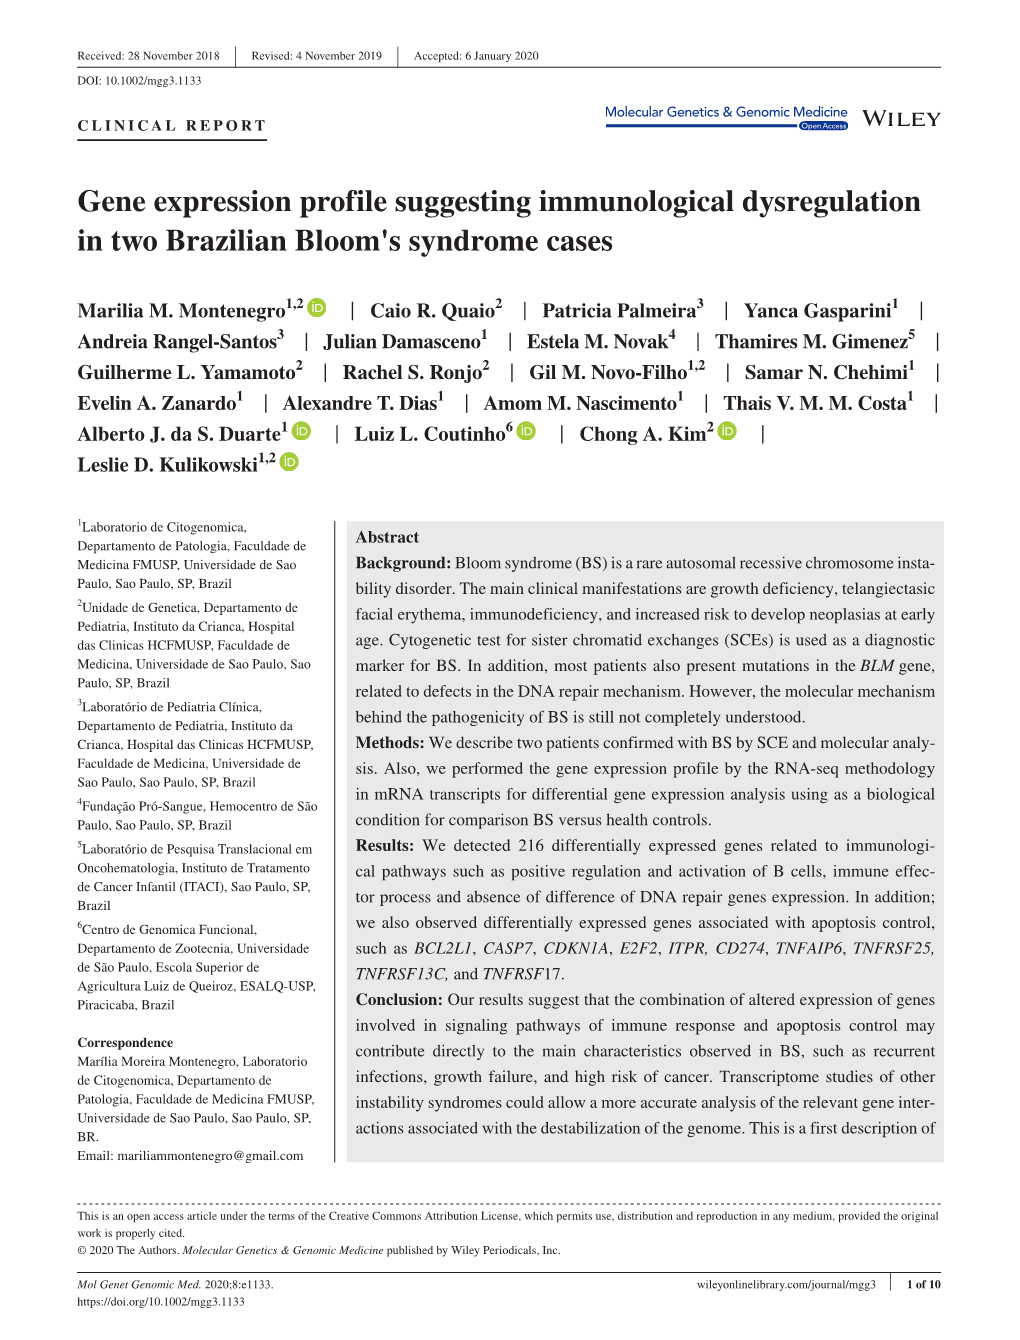 Gene Expression Profile Suggesting Immunological Dysregulation in Two Brazilian Bloom's Syndrome Cases